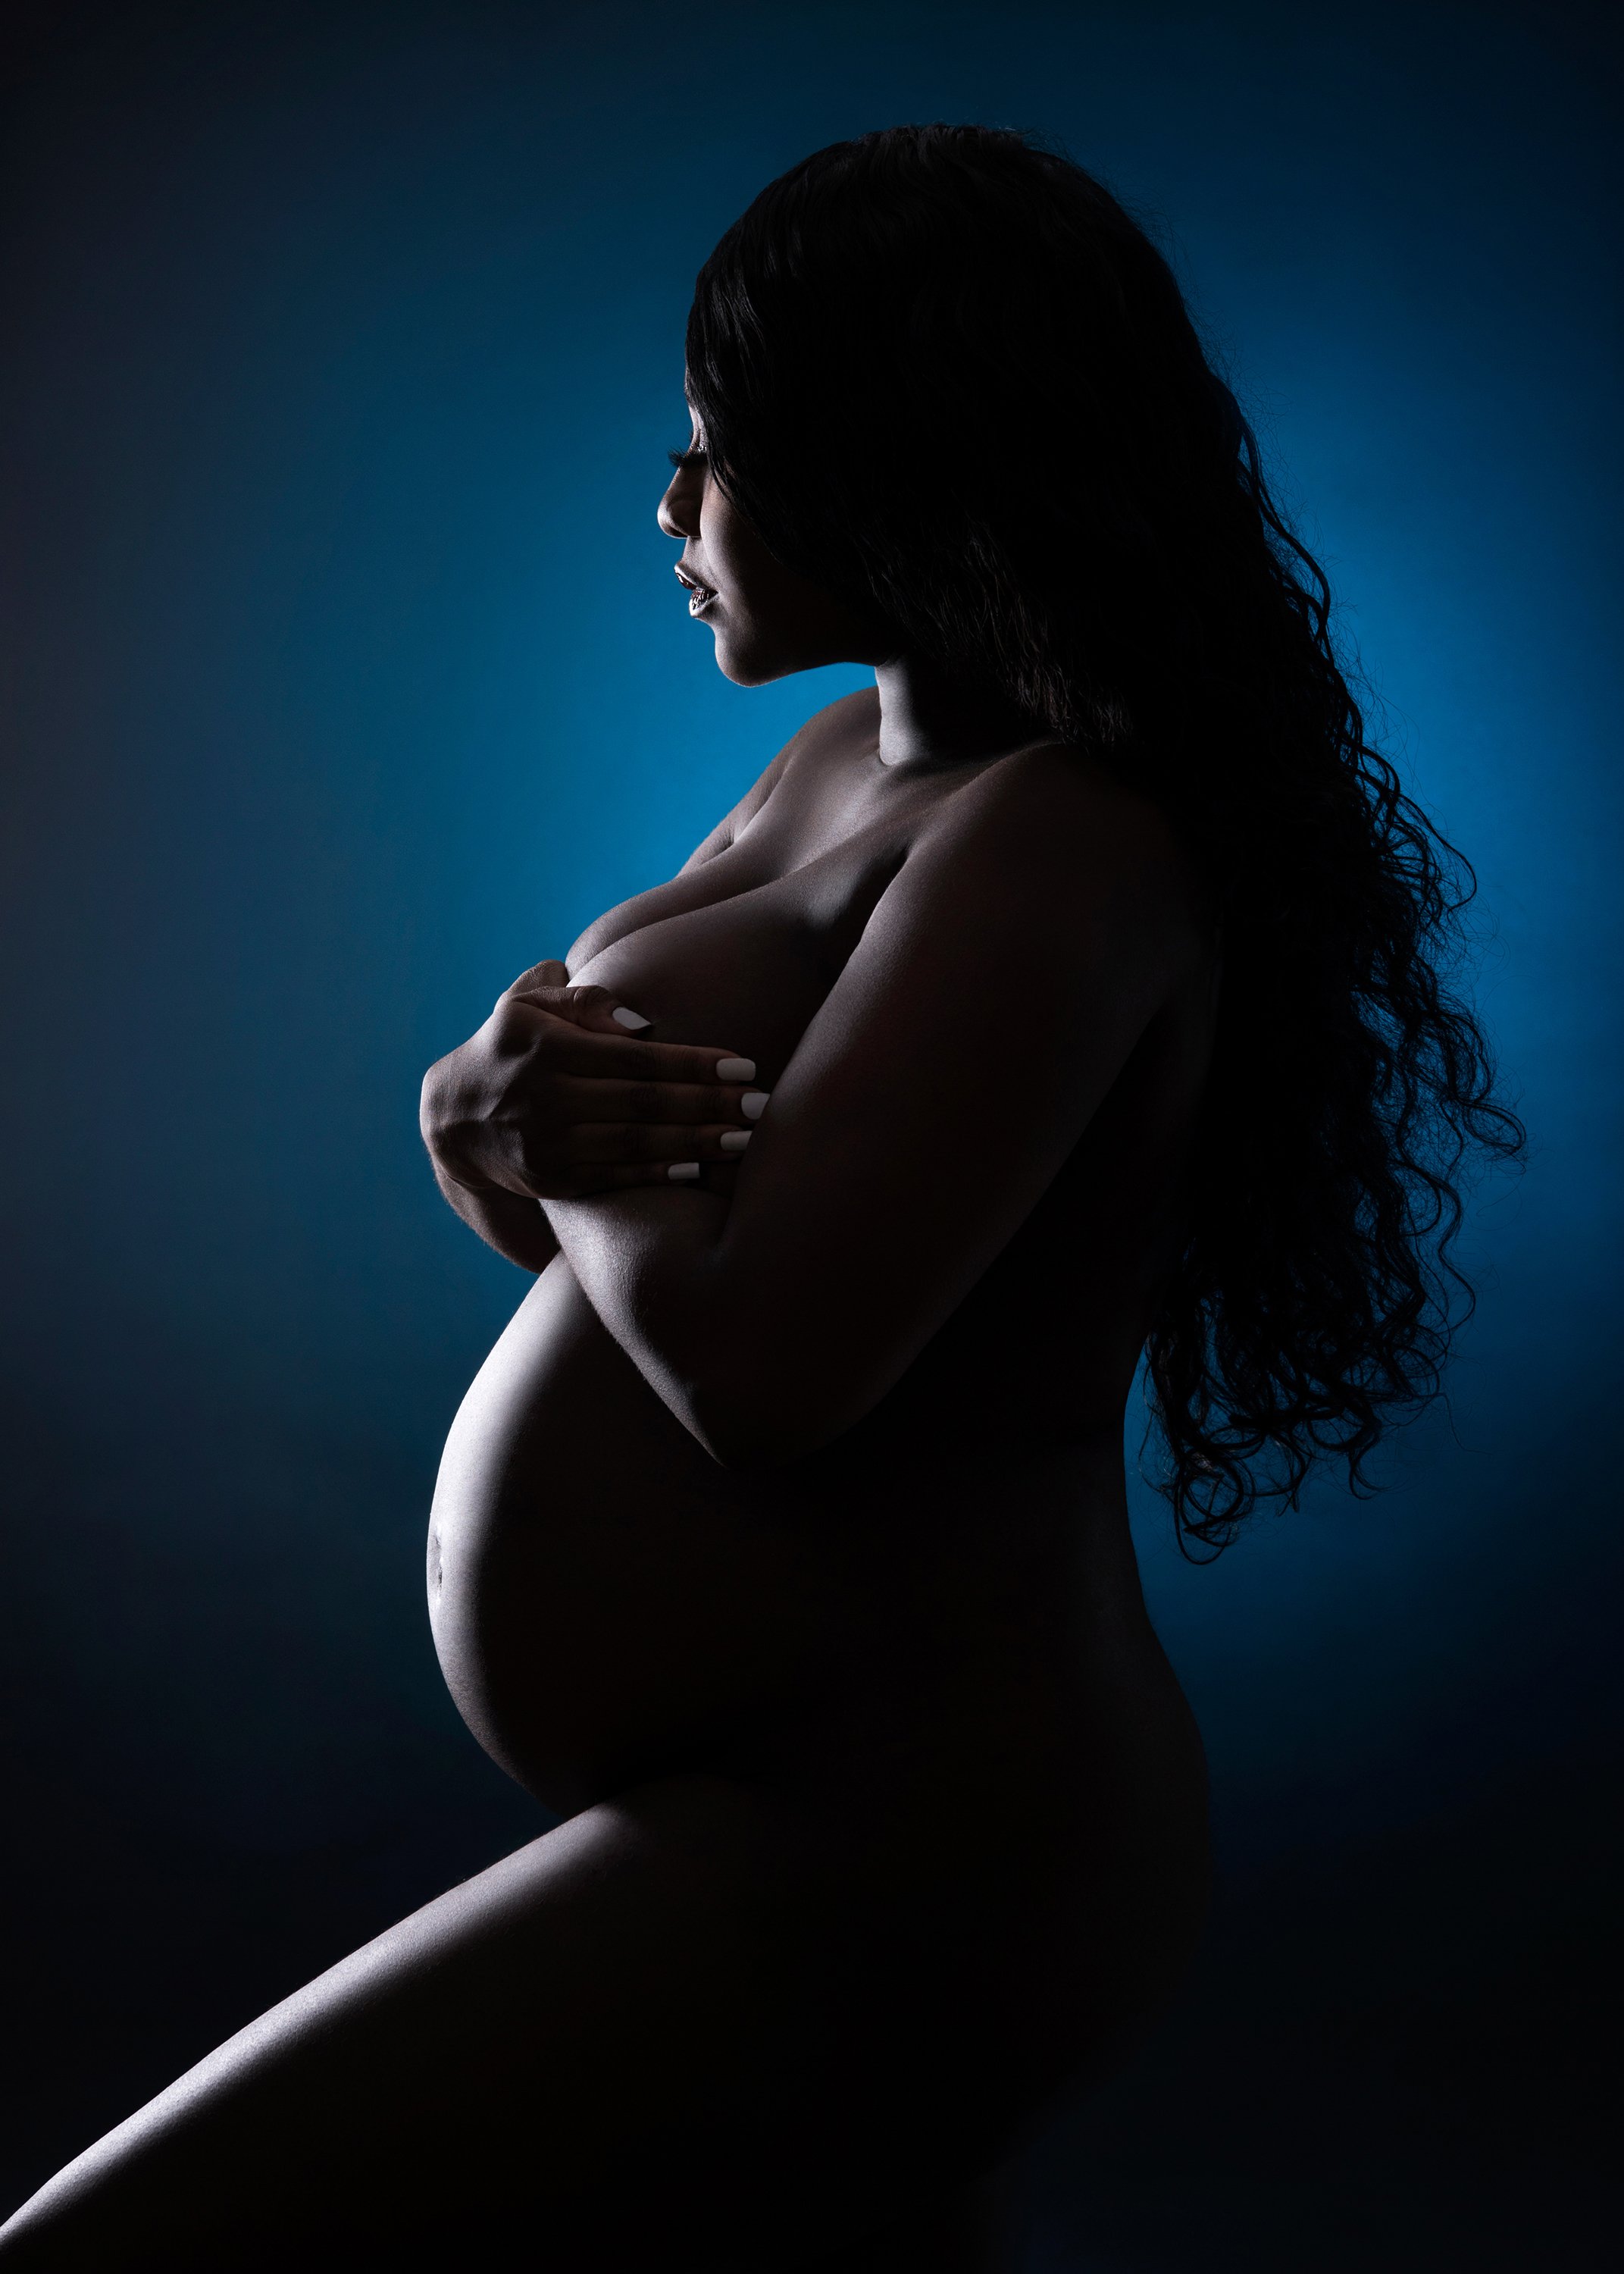 Nude Pregnancy Pictures